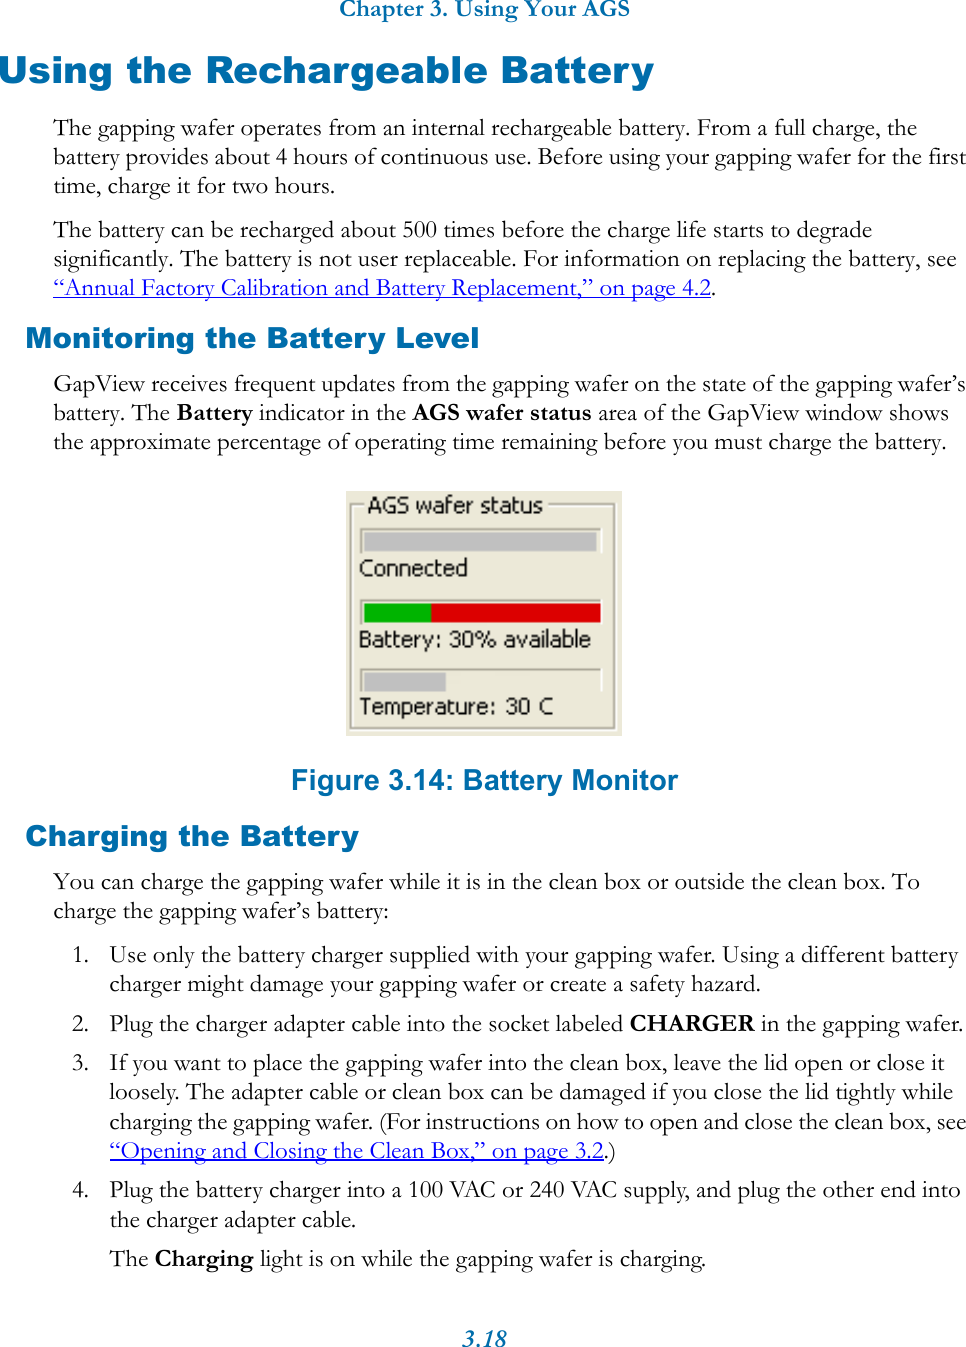 Chapter 3. Using Your AGS3.18Using the Rechargeable BatteryThe gapping wafer operates from an internal rechargeable battery. From a full charge, the battery provides about 4 hours of continuous use. Before using your gapping wafer for the first time, charge it for two hours.The battery can be recharged about 500 times before the charge life starts to degrade significantly. The battery is not user replaceable. For information on replacing the battery, see “Annual Factory Calibration and Battery Replacement,” on page 4.2.Monitoring the Battery LevelGapView receives frequent updates from the gapping wafer on the state of the gapping wafer’s battery. The Battery indicator in the AGS wafer status area of the GapView window shows the approximate percentage of operating time remaining before you must charge the battery. Figure 3.14: Battery MonitorCharging the BatteryYou can charge the gapping wafer while it is in the clean box or outside the clean box. To charge the gapping wafer’s battery:1. Use only the battery charger supplied with your gapping wafer. Using a different battery charger might damage your gapping wafer or create a safety hazard.2. Plug the charger adapter cable into the socket labeled CHARGER in the gapping wafer.3. If you want to place the gapping wafer into the clean box, leave the lid open or close it loosely. The adapter cable or clean box can be damaged if you close the lid tightly while charging the gapping wafer. (For instructions on how to open and close the clean box, see “Opening and Closing the Clean Box,” on page 3.2.)4. Plug the battery charger into a 100 VAC or 240 VAC supply, and plug the other end into the charger adapter cable.The Charging light is on while the gapping wafer is charging.